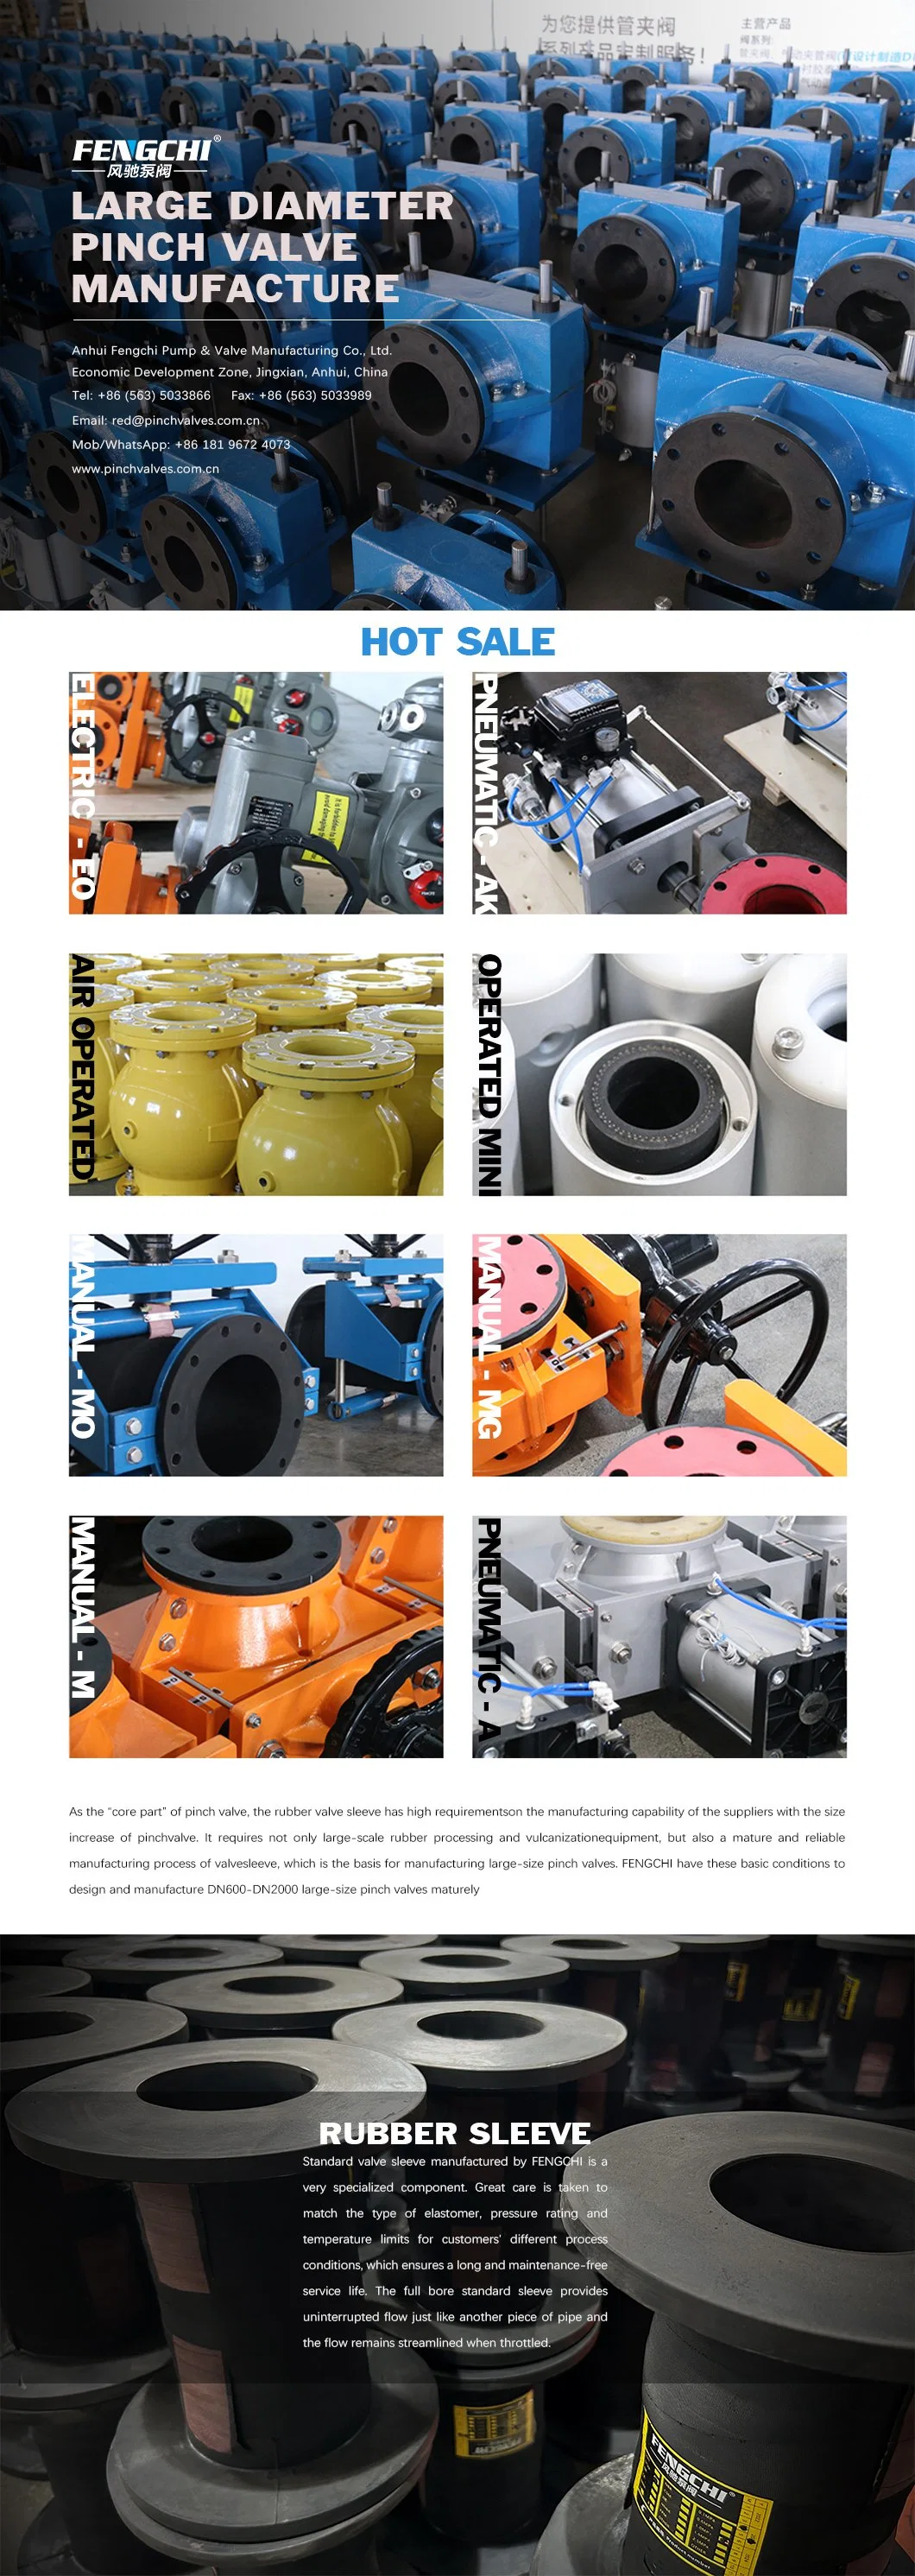 Air Operated Pinch Valve Cost Effective Pinch Valve